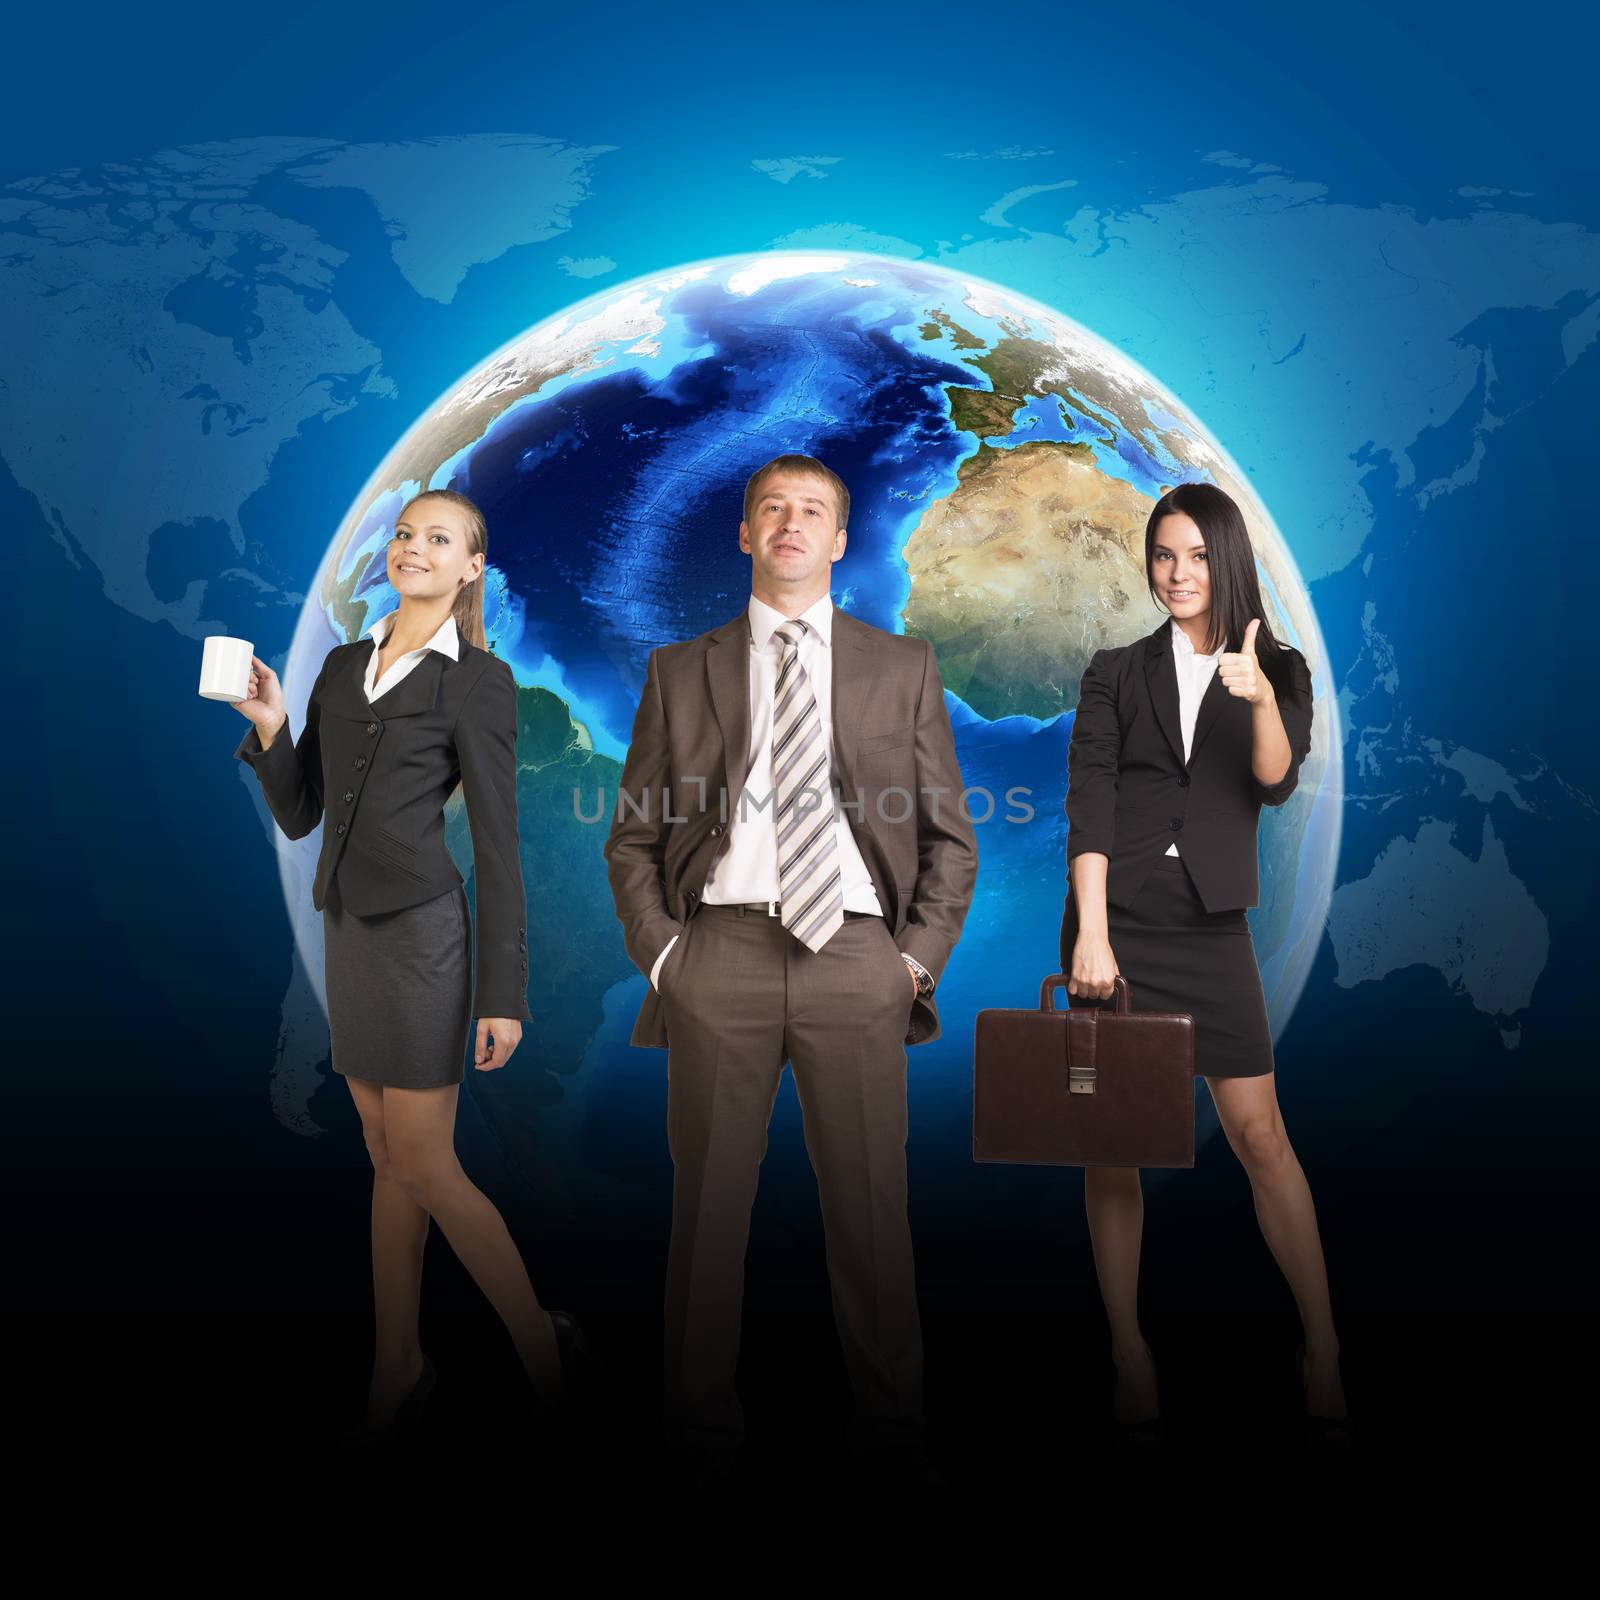 Business people in suits standing on background of Earth by cherezoff